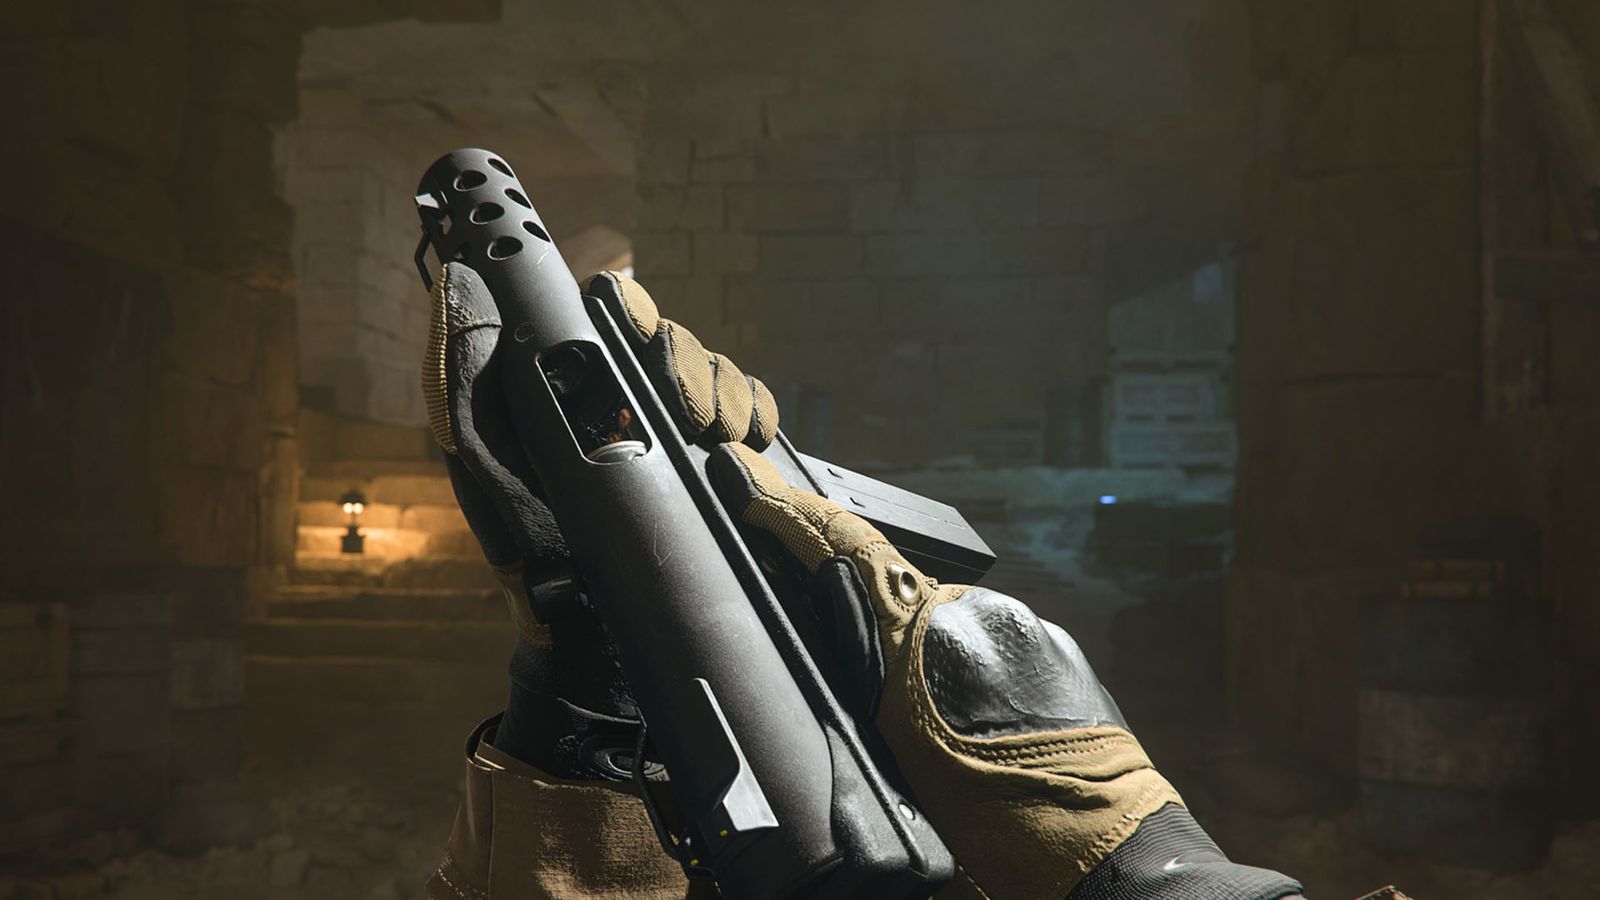 Screenshot of Modern Warfare 2 player holding an FTAC Siege pistol with both hands in dimly lit cave